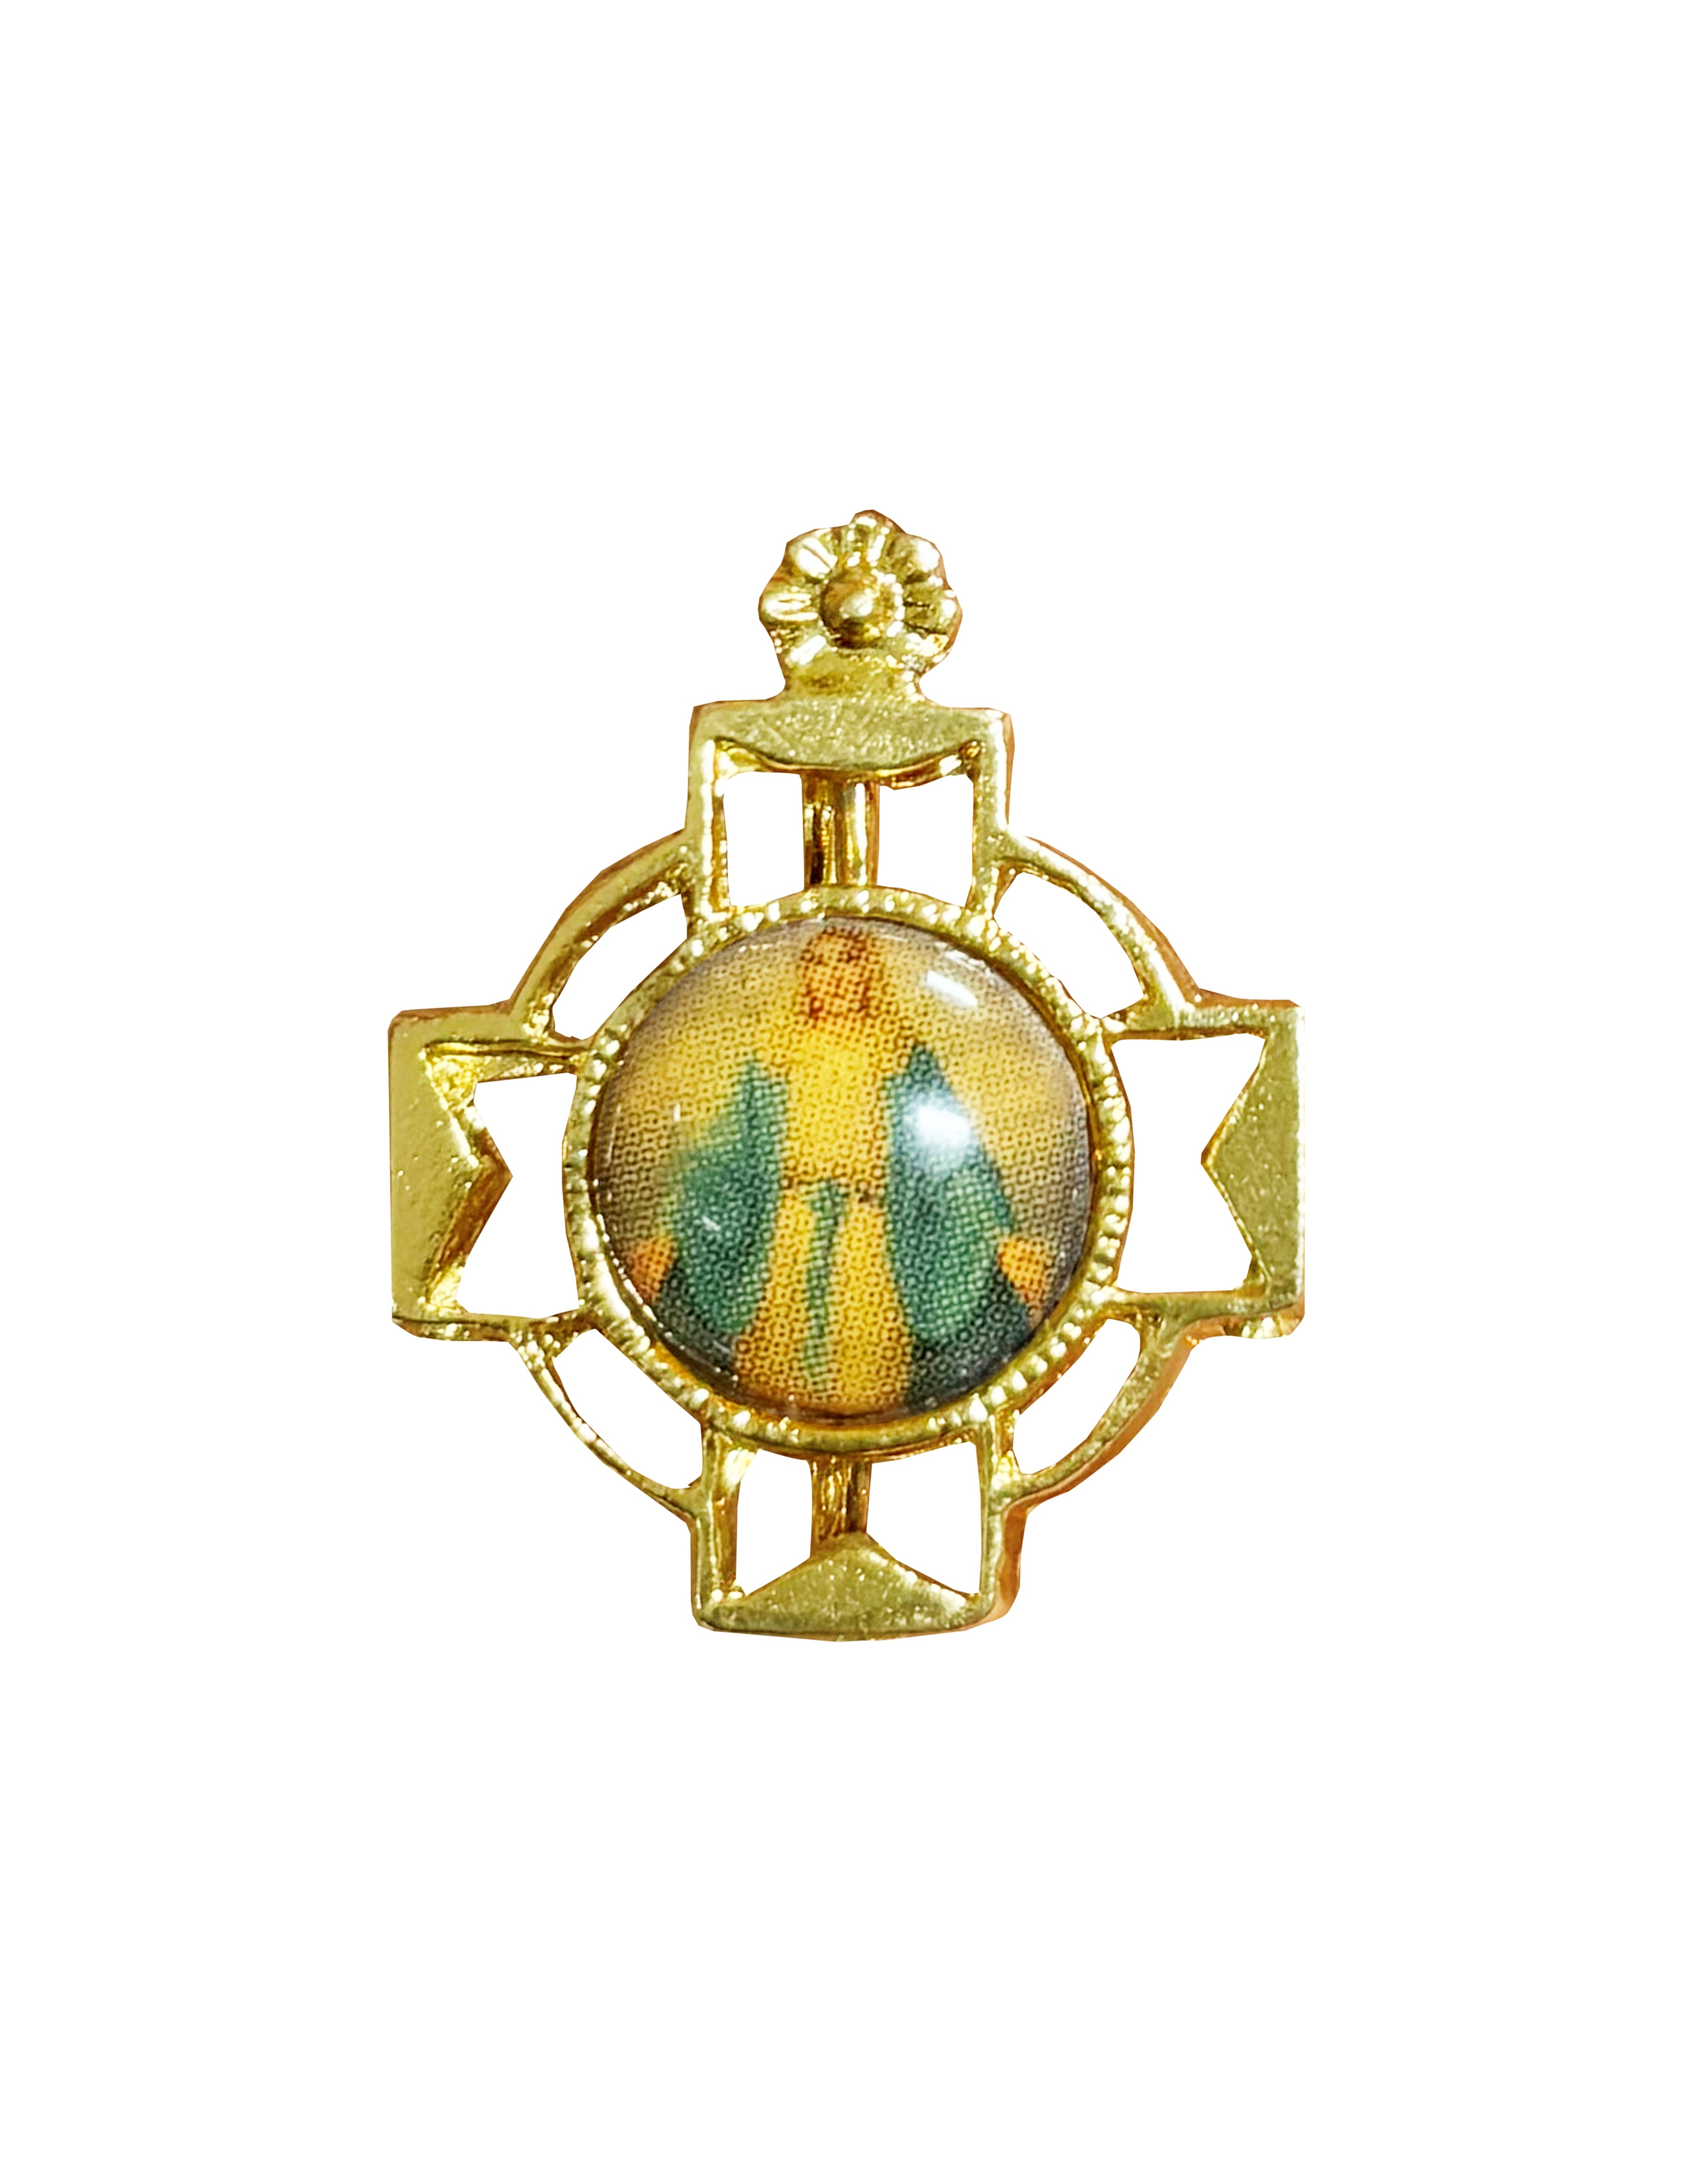 Lapel pin gold cross and enameled print